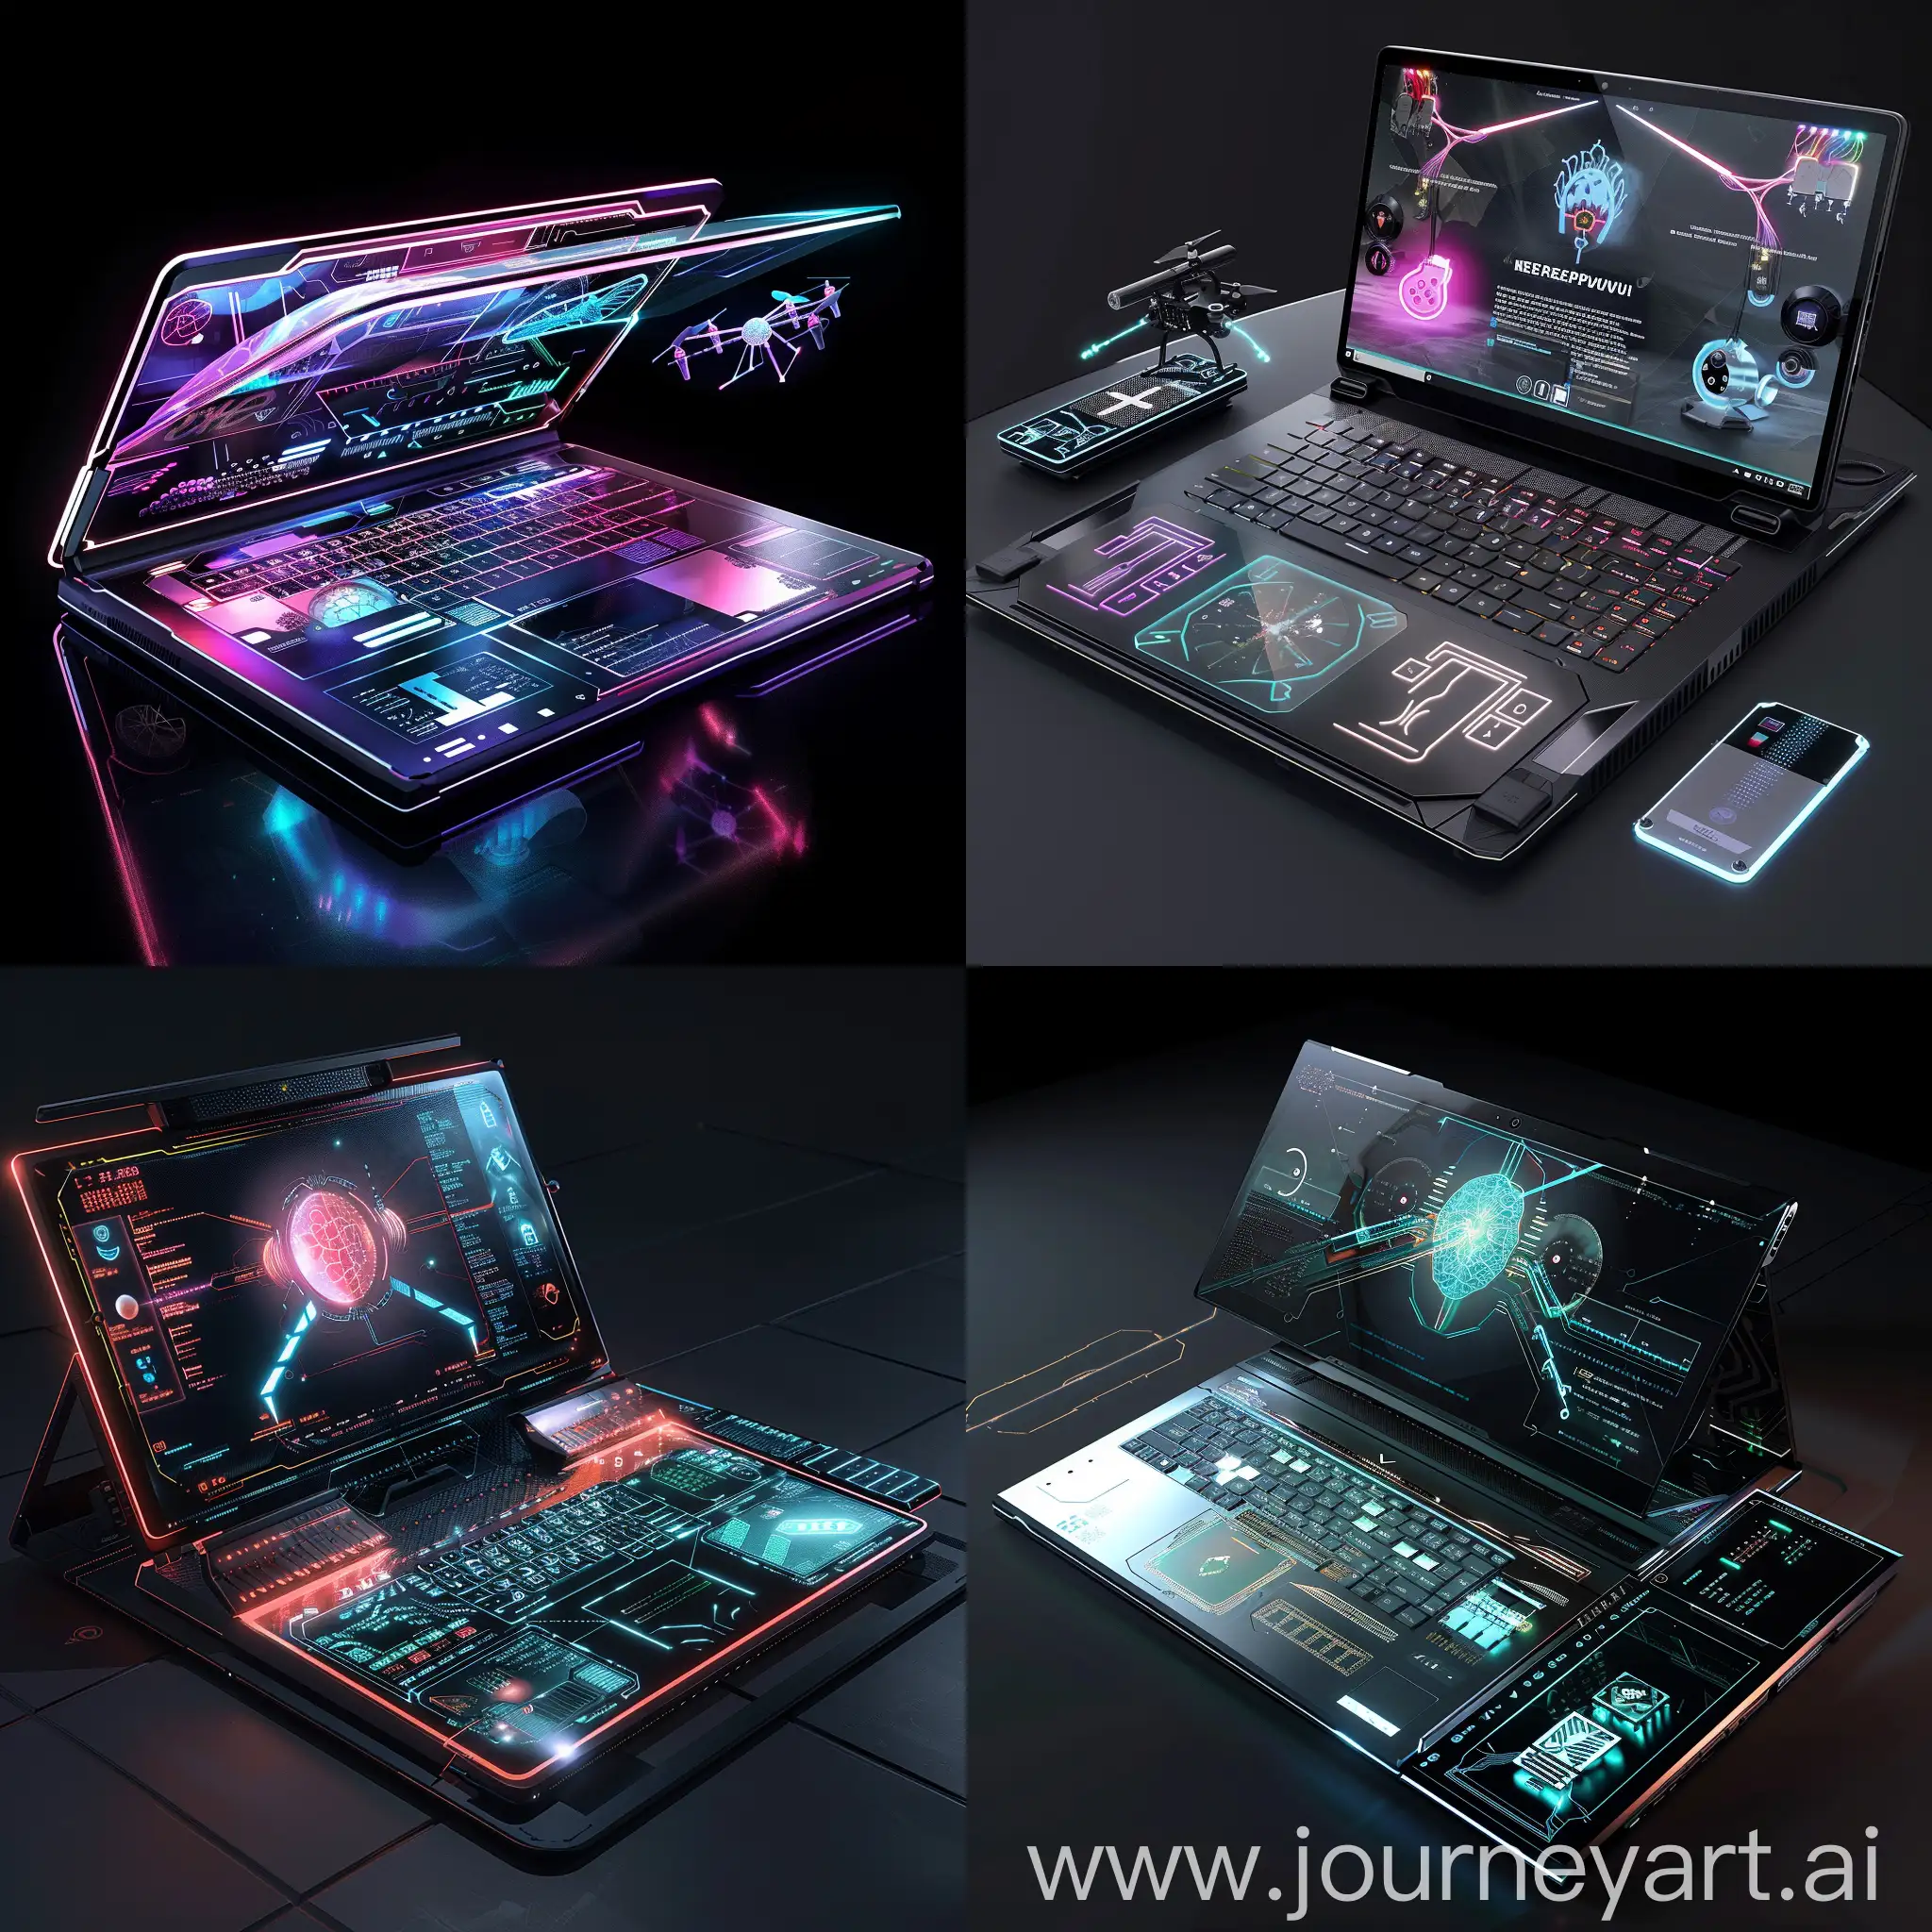 Futuristic laptop, in futuristic style, Neural Processing Unit (NPU), Quantum Computing Accelerator, Holographic Display Projection, Graphene-based Cooling System, Biometric Authentication Sensors, Nanotechnology Battery, Neural Interface, Dynamic Modular Design, Light-based Data Transmission, Quantum Dot Storage, Augmented Reality (AR) Projection Keyboard, Dynamic OLED Body Panels, Electroluminescent Trim, Carbon Nanotube Framework, Magnetic Levitation Stand, Integrated Haptic Feedback System, Interactive Light Strips, Smart Fabric Exterior, Retractable Camera Drone, Biometric Security Latch, unreal engine 5 --stylize 1000